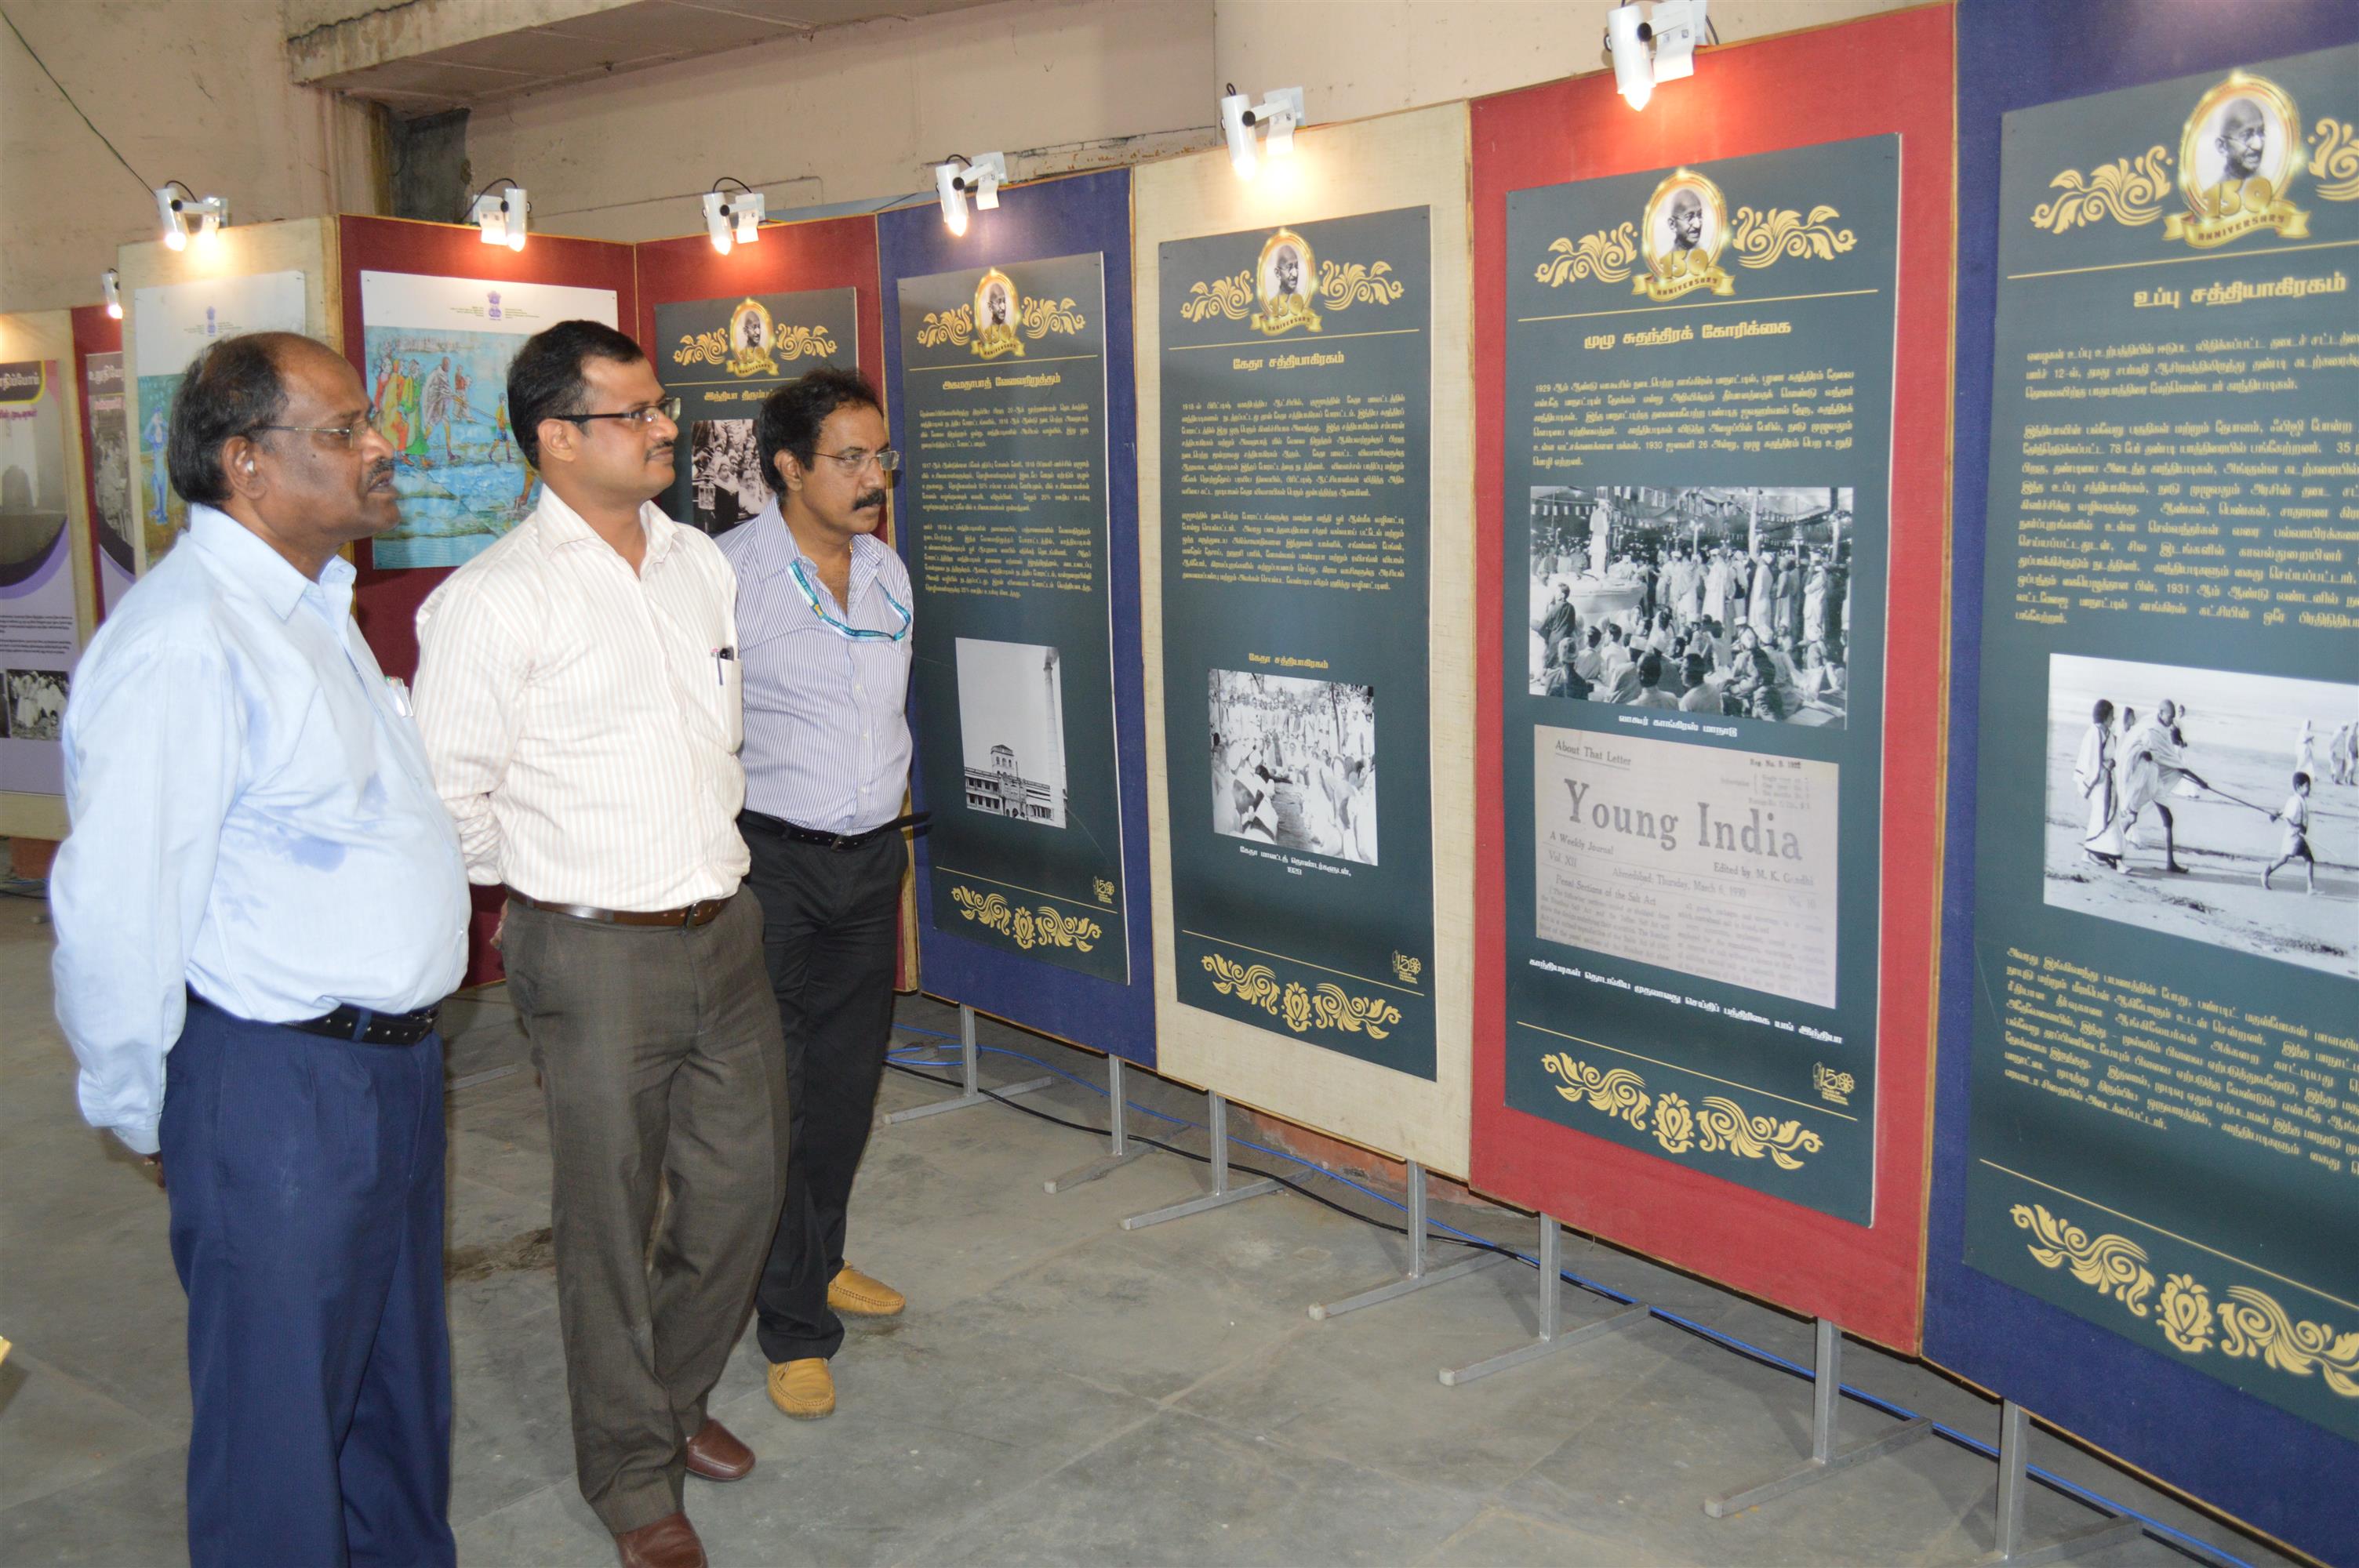 Shri. P.K. Ashok Babu, IFS, Regional Passport Officer visiting the exhibition organized during the Special awareness camp on 150th Birth Anniversary of Mahatma Gandhi, 73rd Independence Day and Quit India Movement organized by the Regional Outreach Bureau, Ministry of Information & Broadcasting in Thiruvanmiyur Railway Station, Chennai today (13.08.2019). Shri. E. Mariappan, IIS, Additional Director General, Press Information Bureau & Regional Outreach Bureau, Chennai is also seen. 